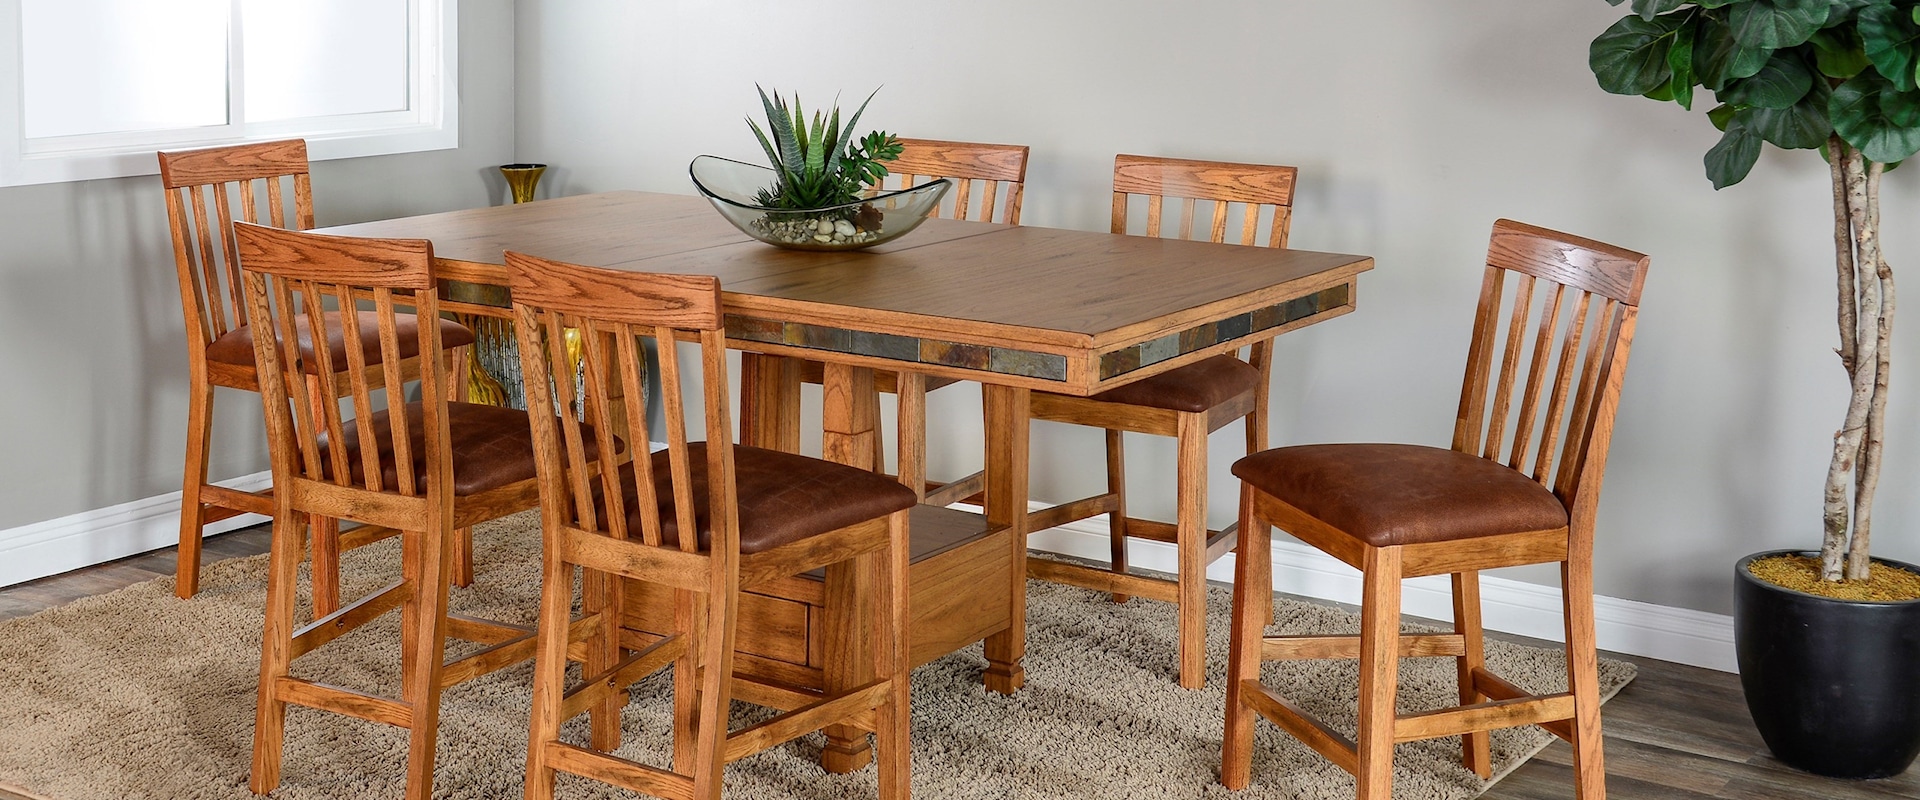 Pub Table Dining Set for Six